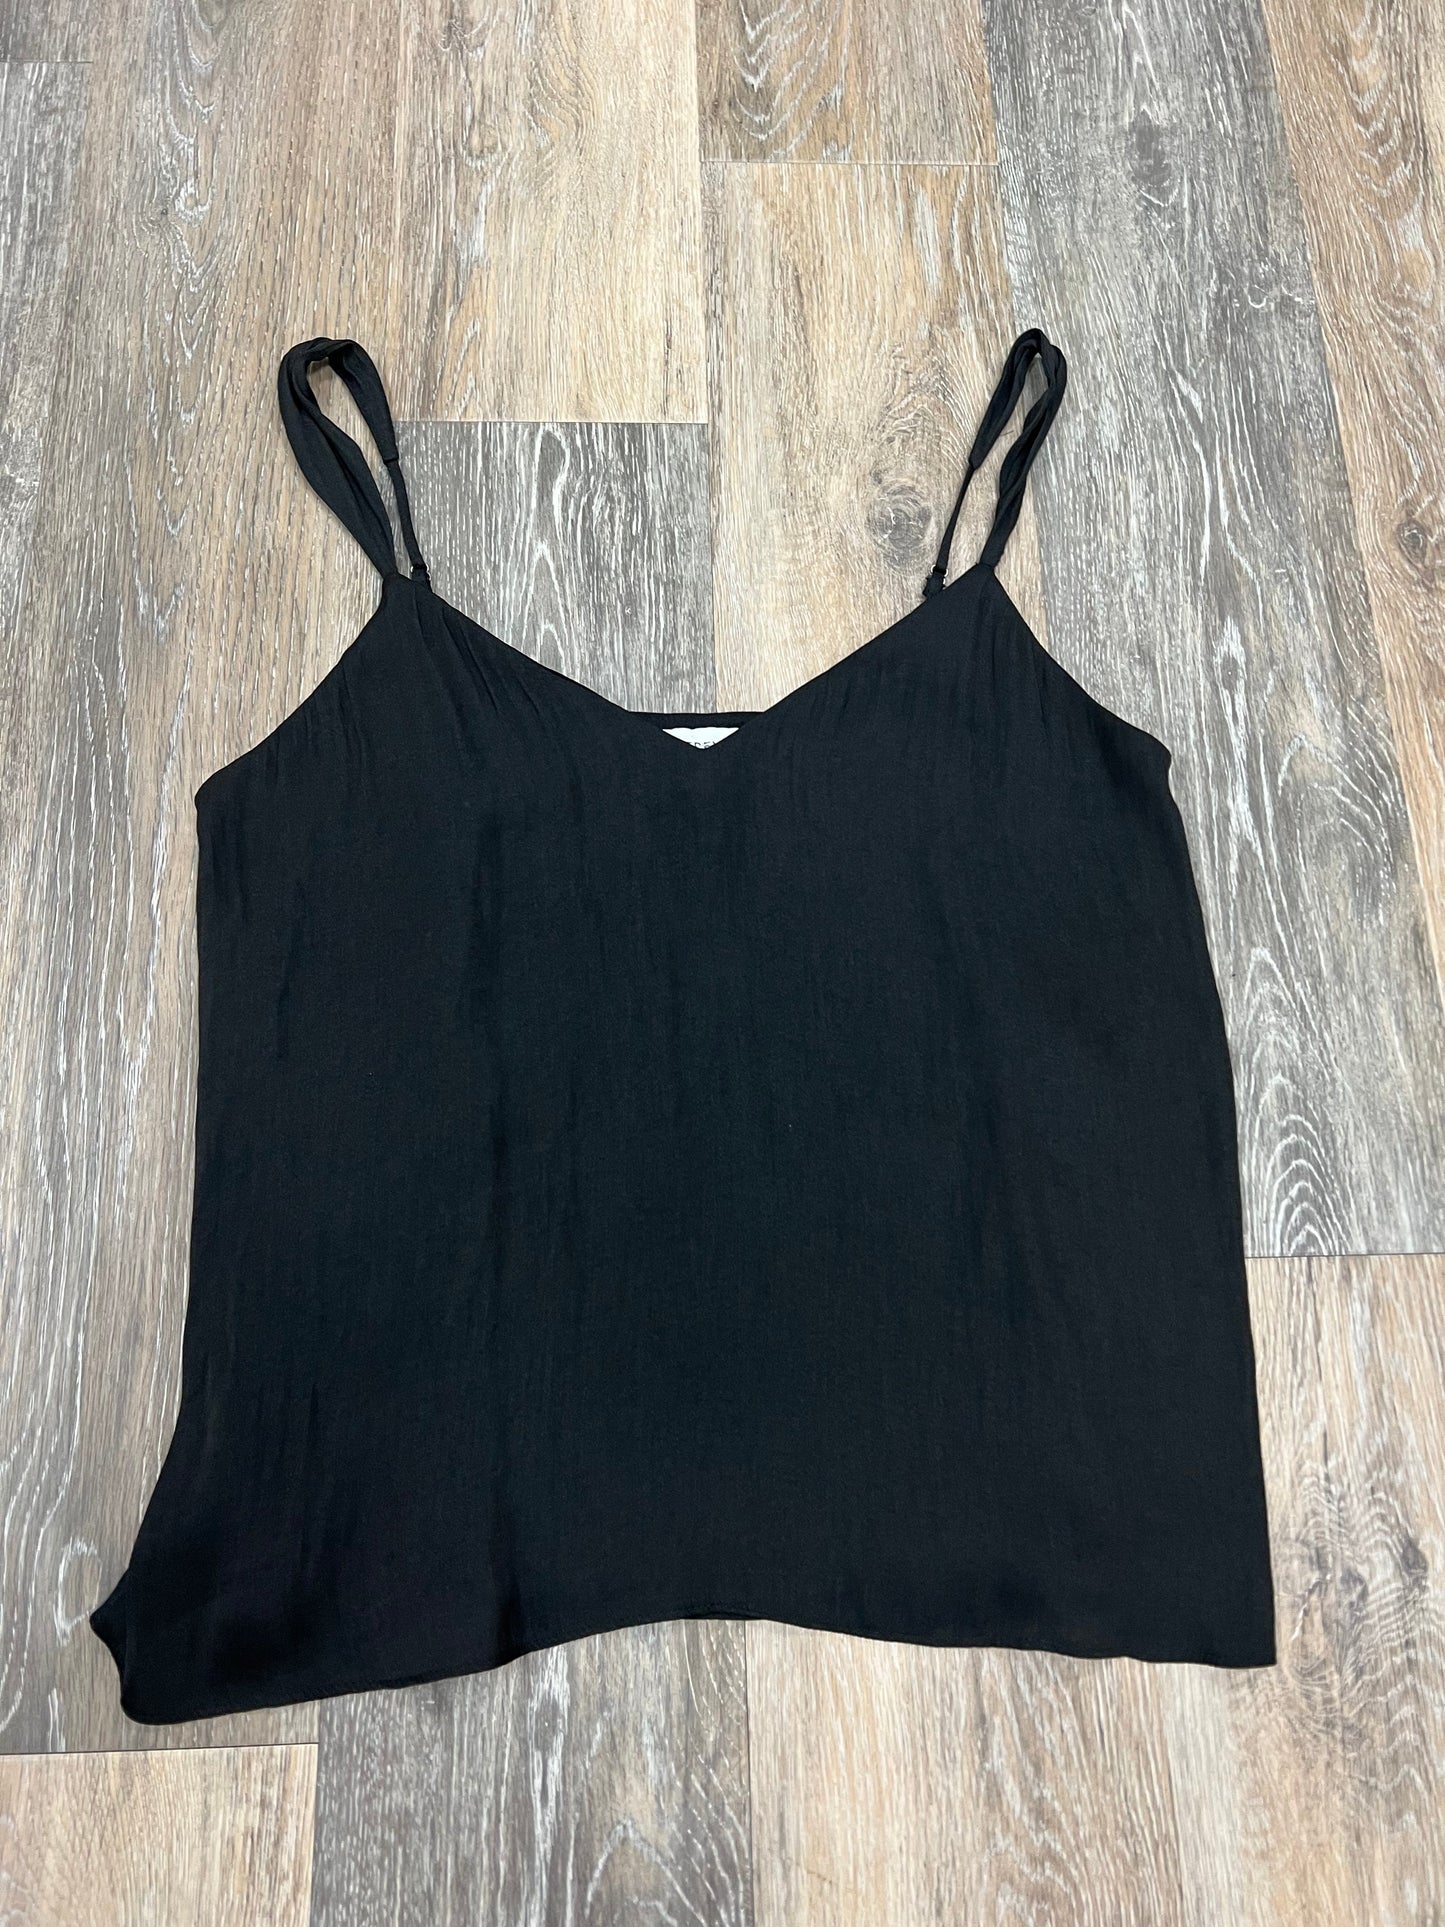 Tank Top By Evereve  Size: S